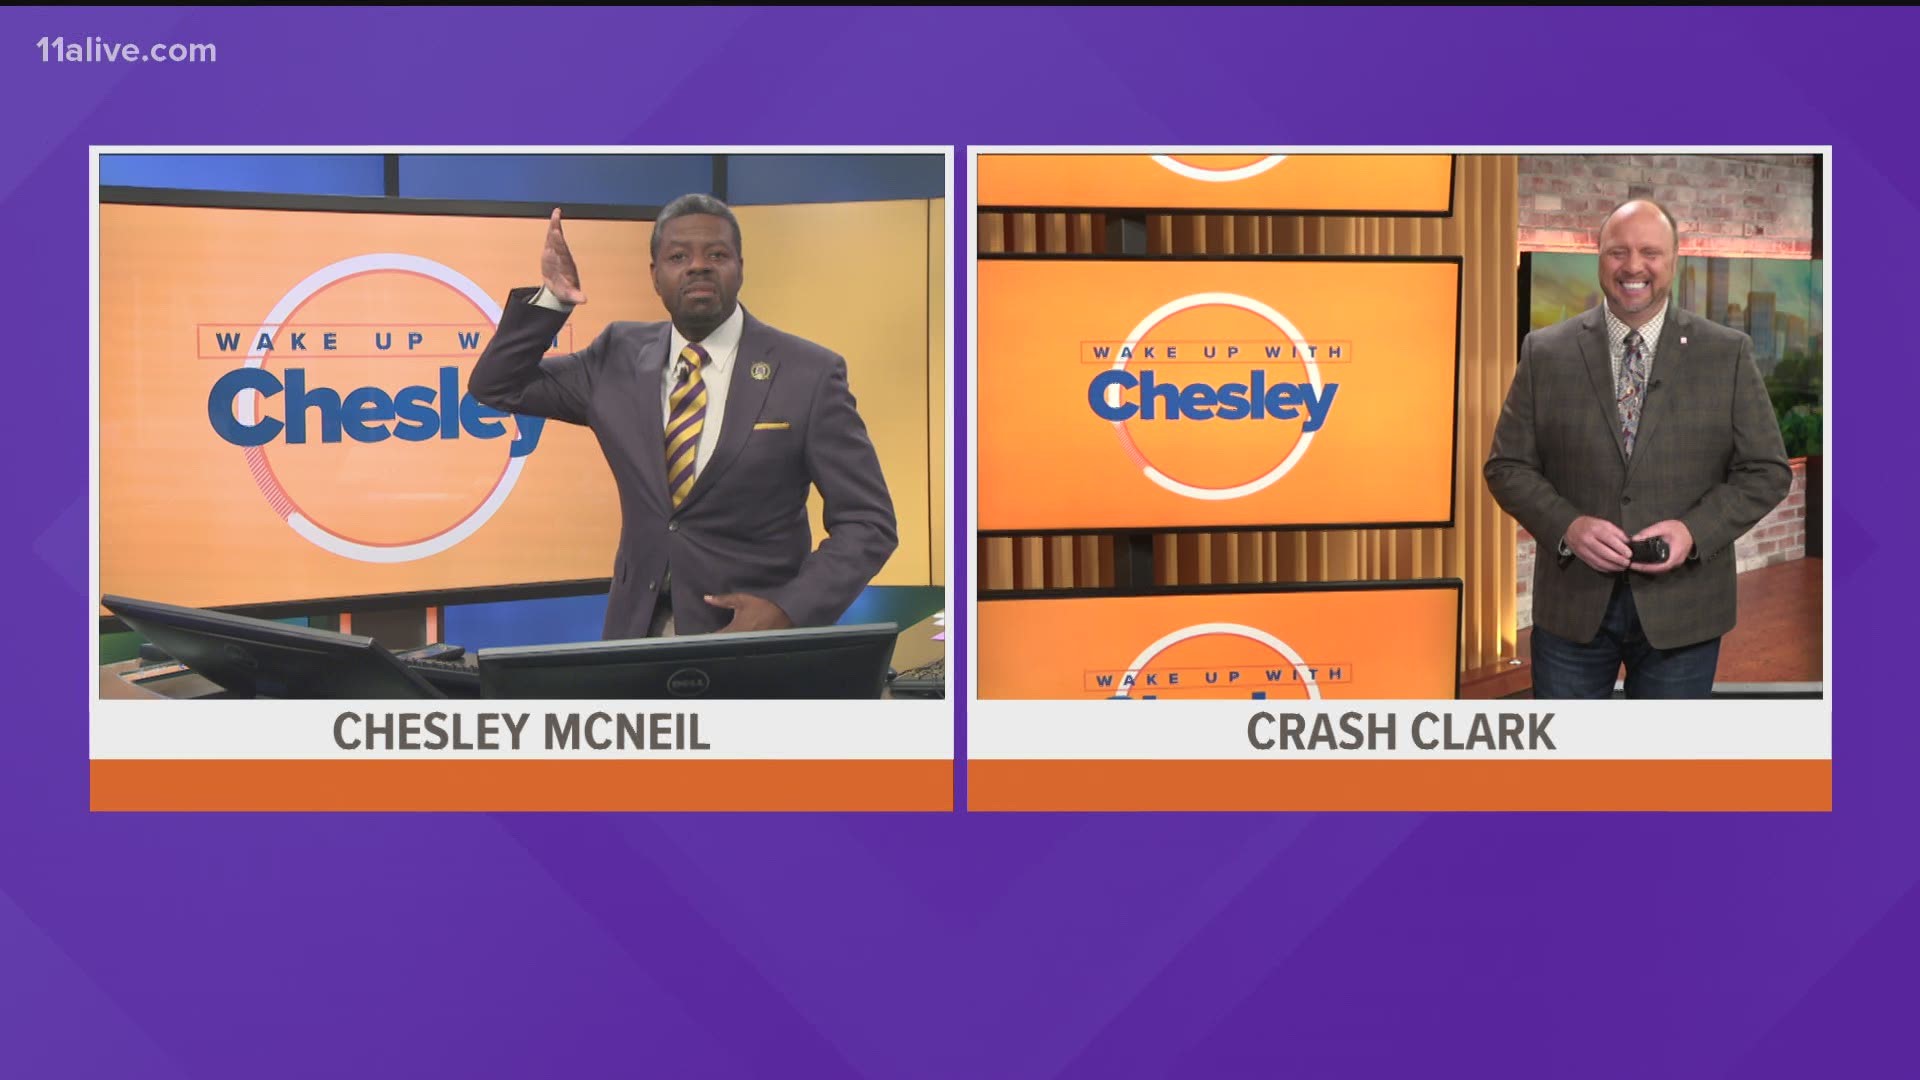 11Alive is sending you all a Happy Founders' Day! Special shoutout to our Meteorologist Chesley McNeil!